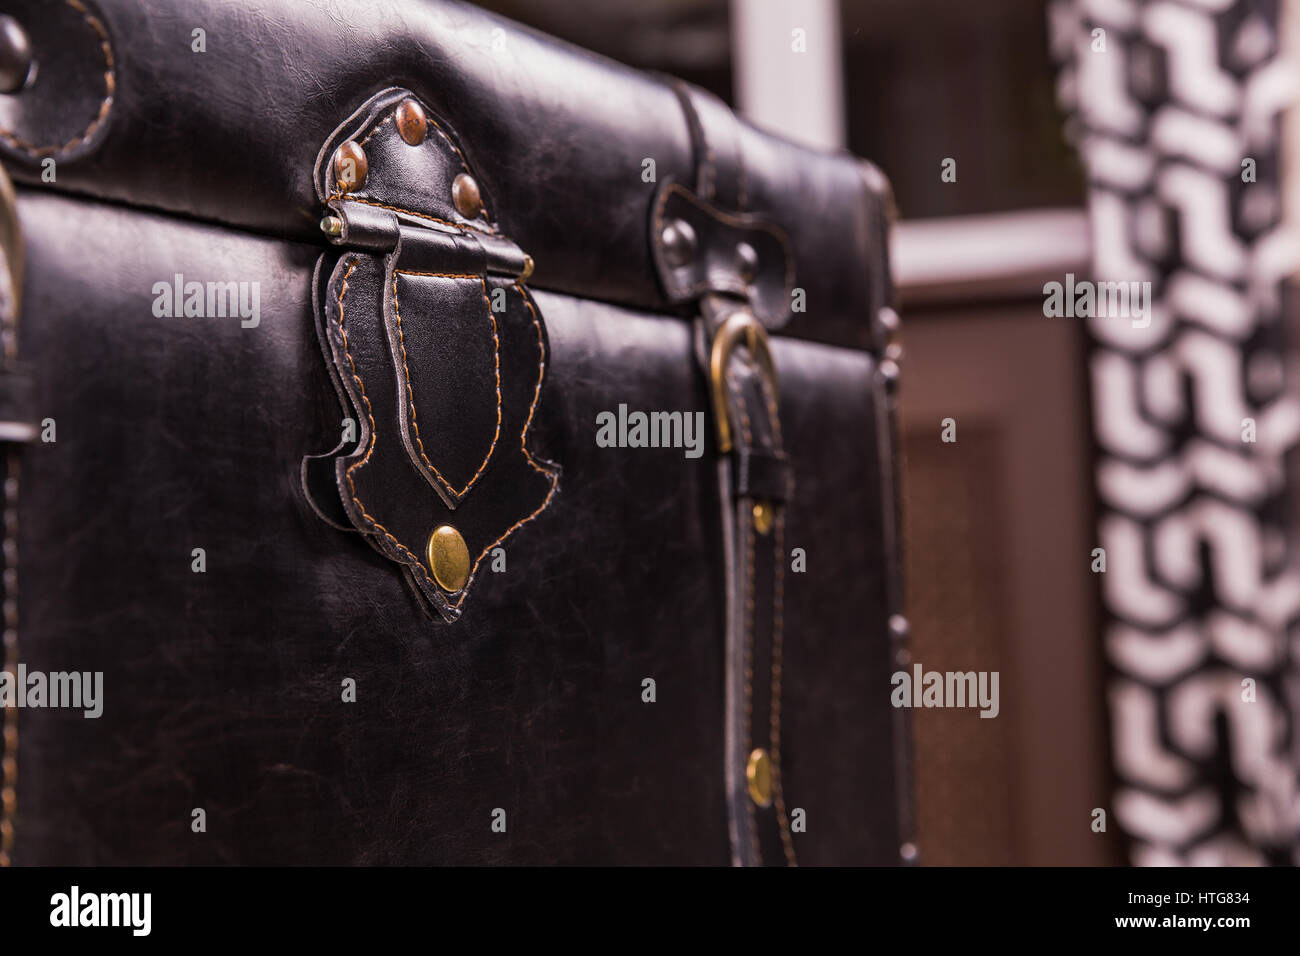 Black vintage suitcase leather texture. Old style bag clasp, buckle and belt closeup Stock Photo